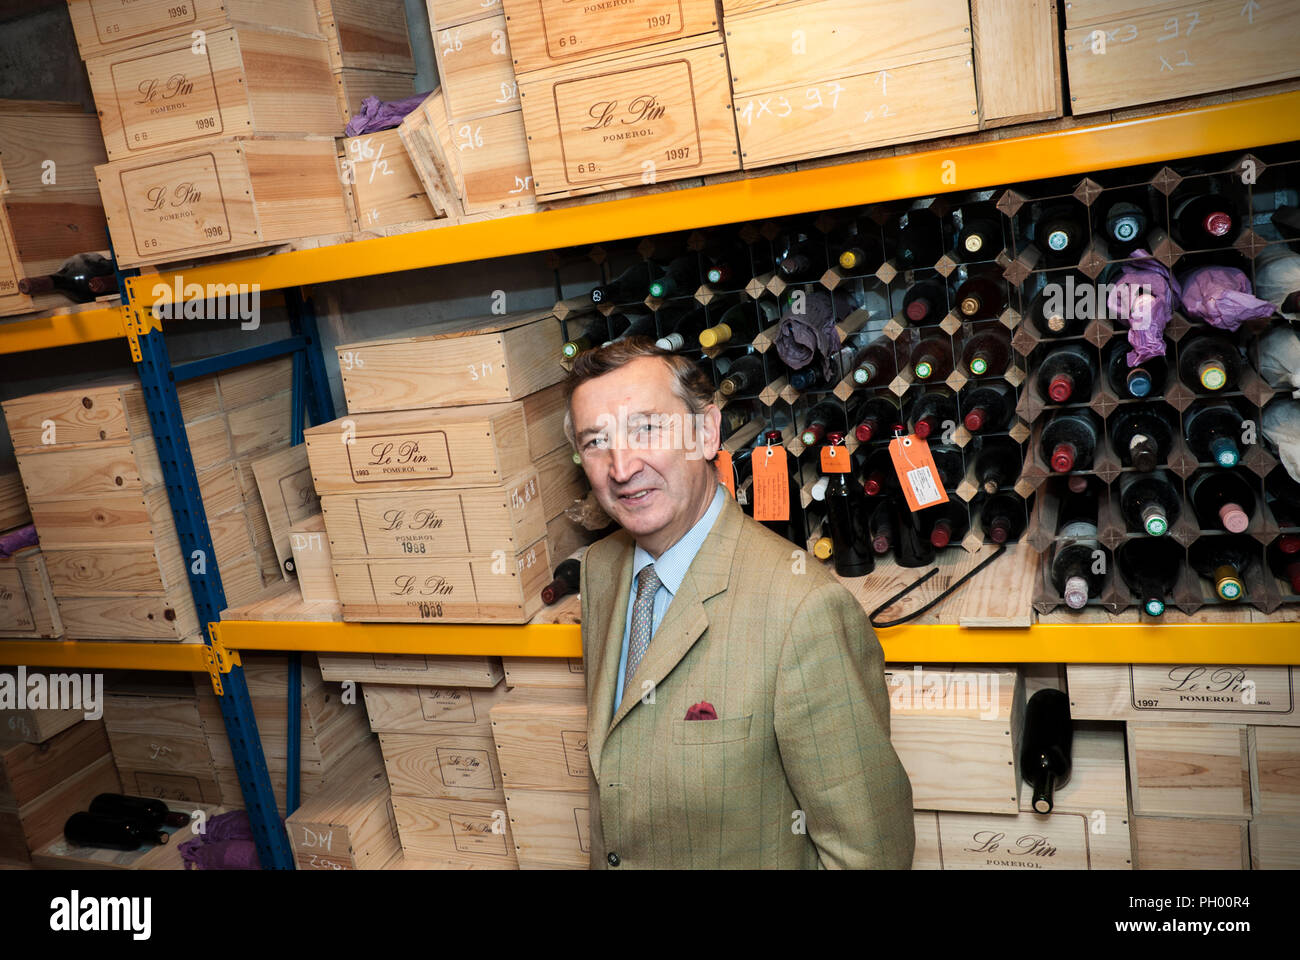 Jacques Thienpont in his Château Le Pin wine cellar with cases and bottles of renowned ‘Le Pin’ Bordeaux fine wine from appellation Pomerol France Stock Photo